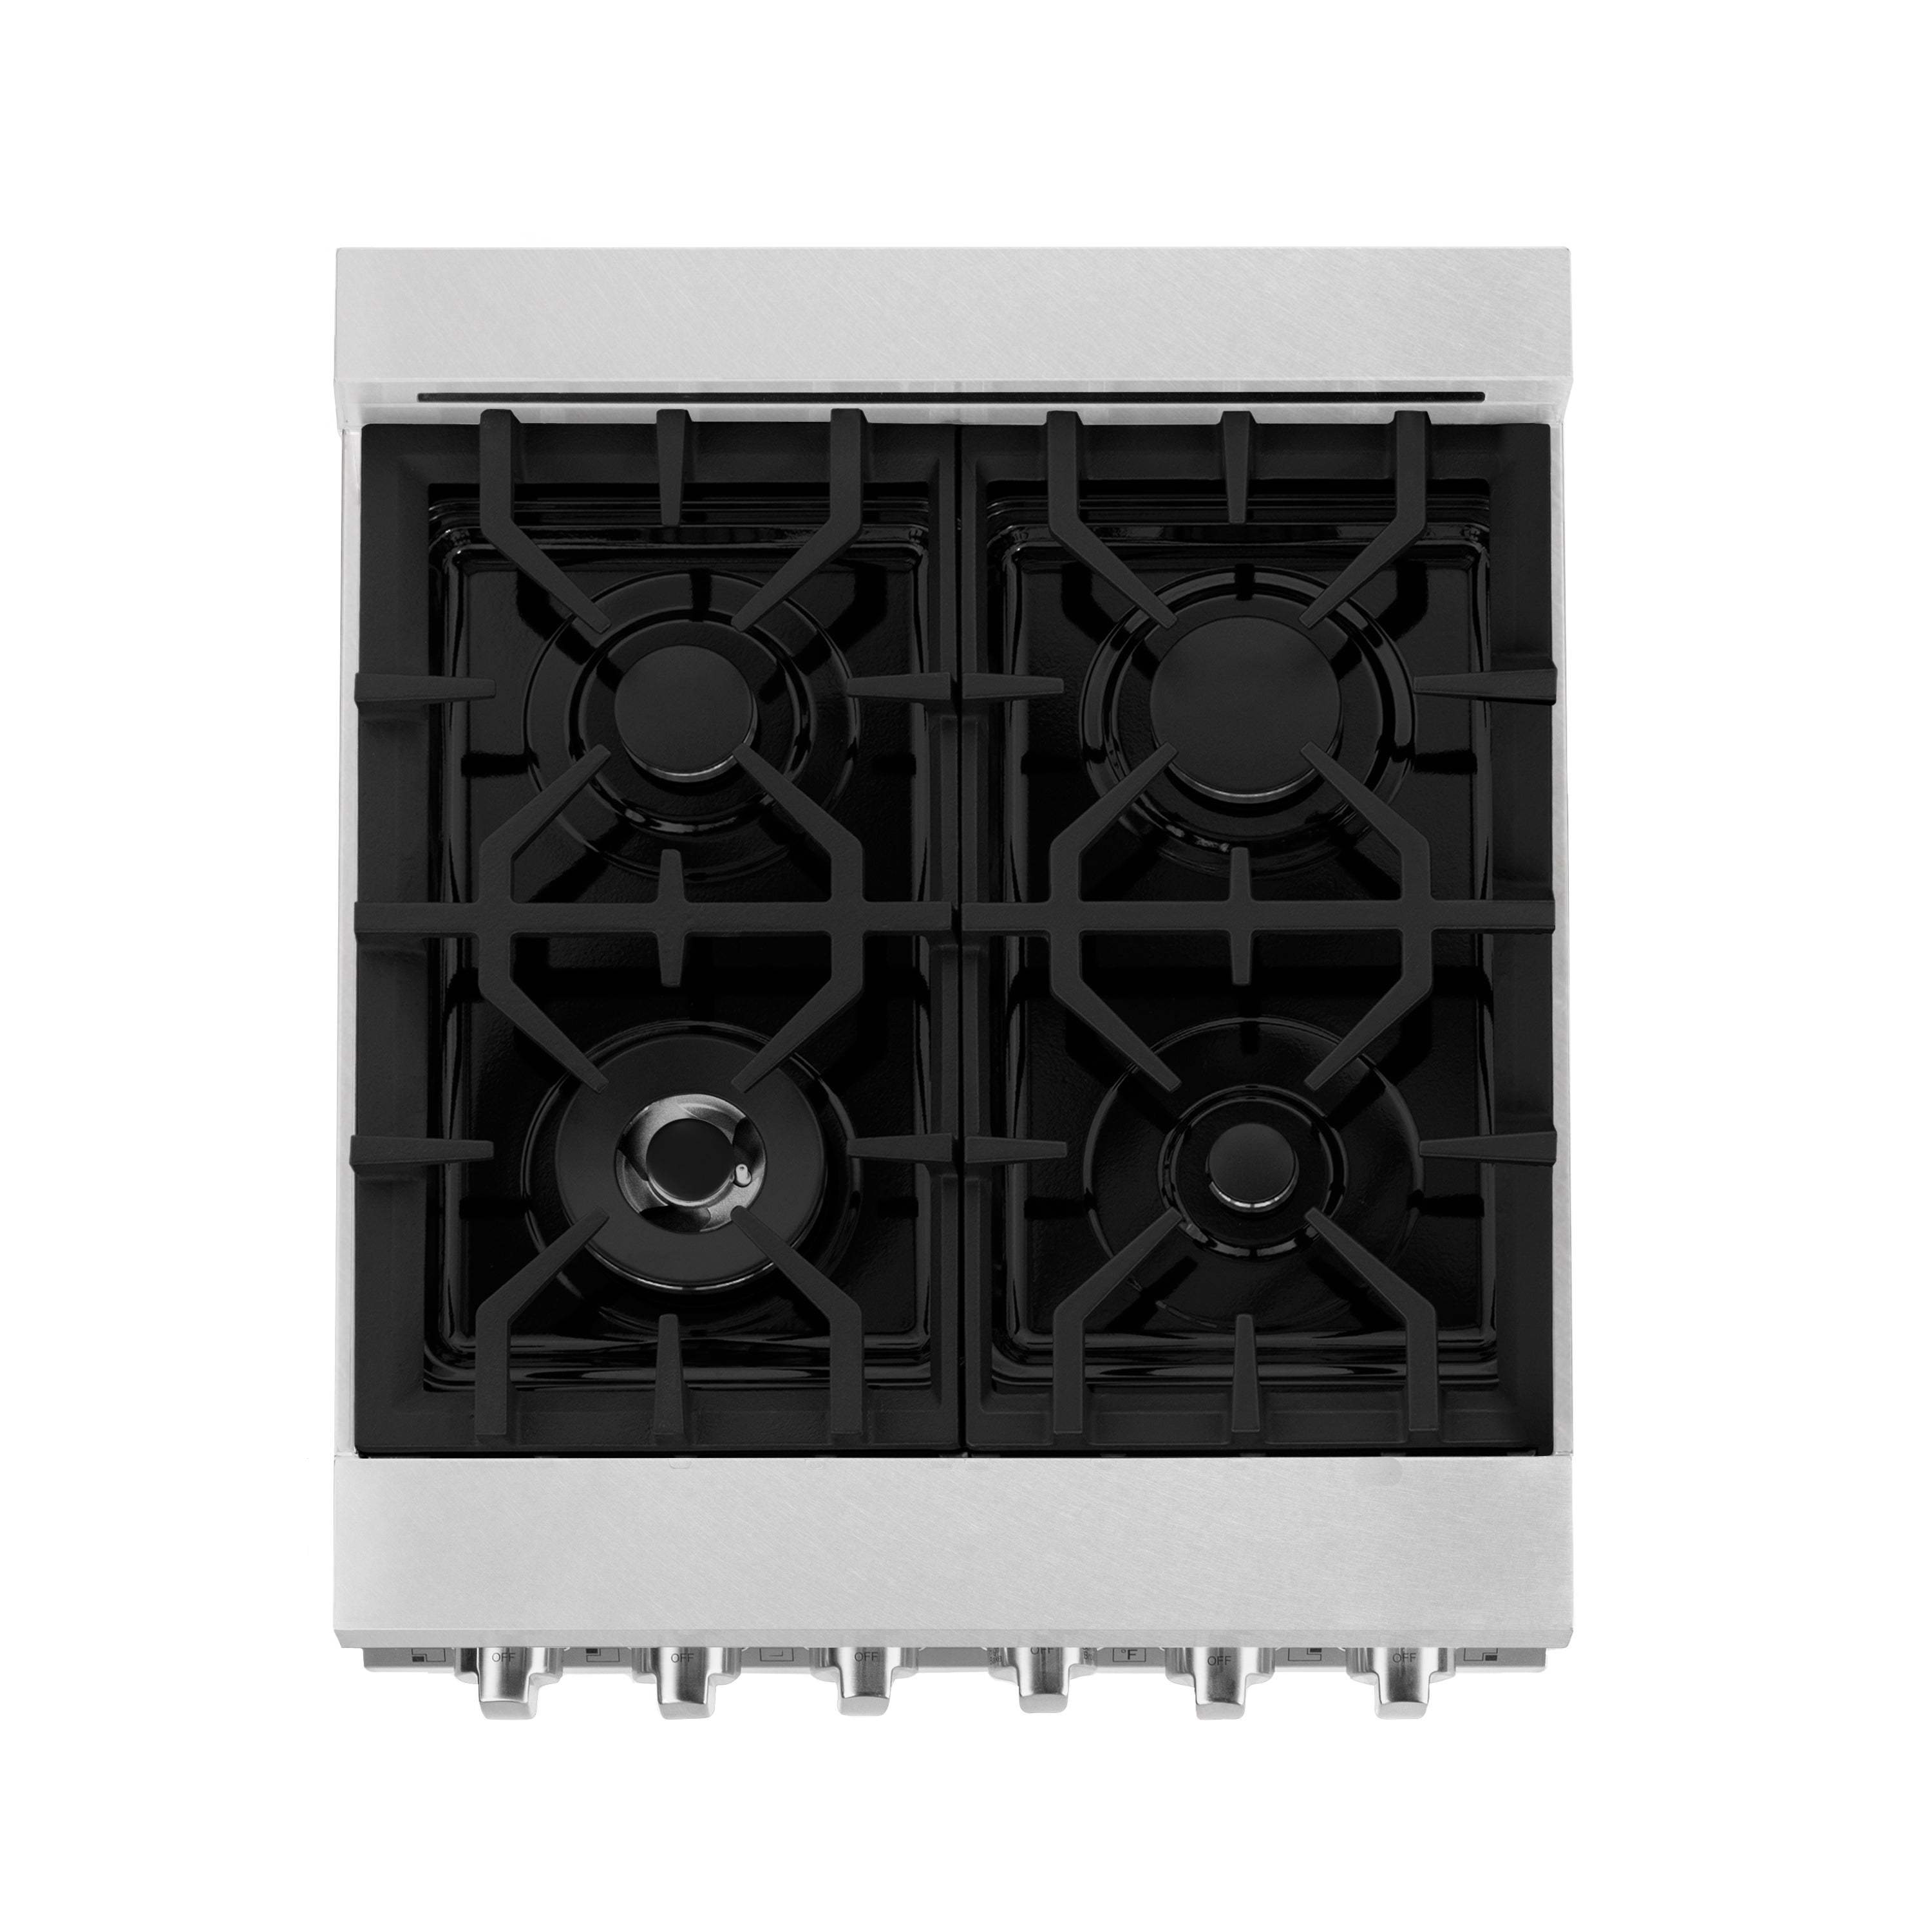 ZLINE 24" 2.8 cu. ft. Range with Gas Stove and Gas Oven in Fingerprint Resistant Stainless Steel and Black Matte Door (RGS-BLM-24)